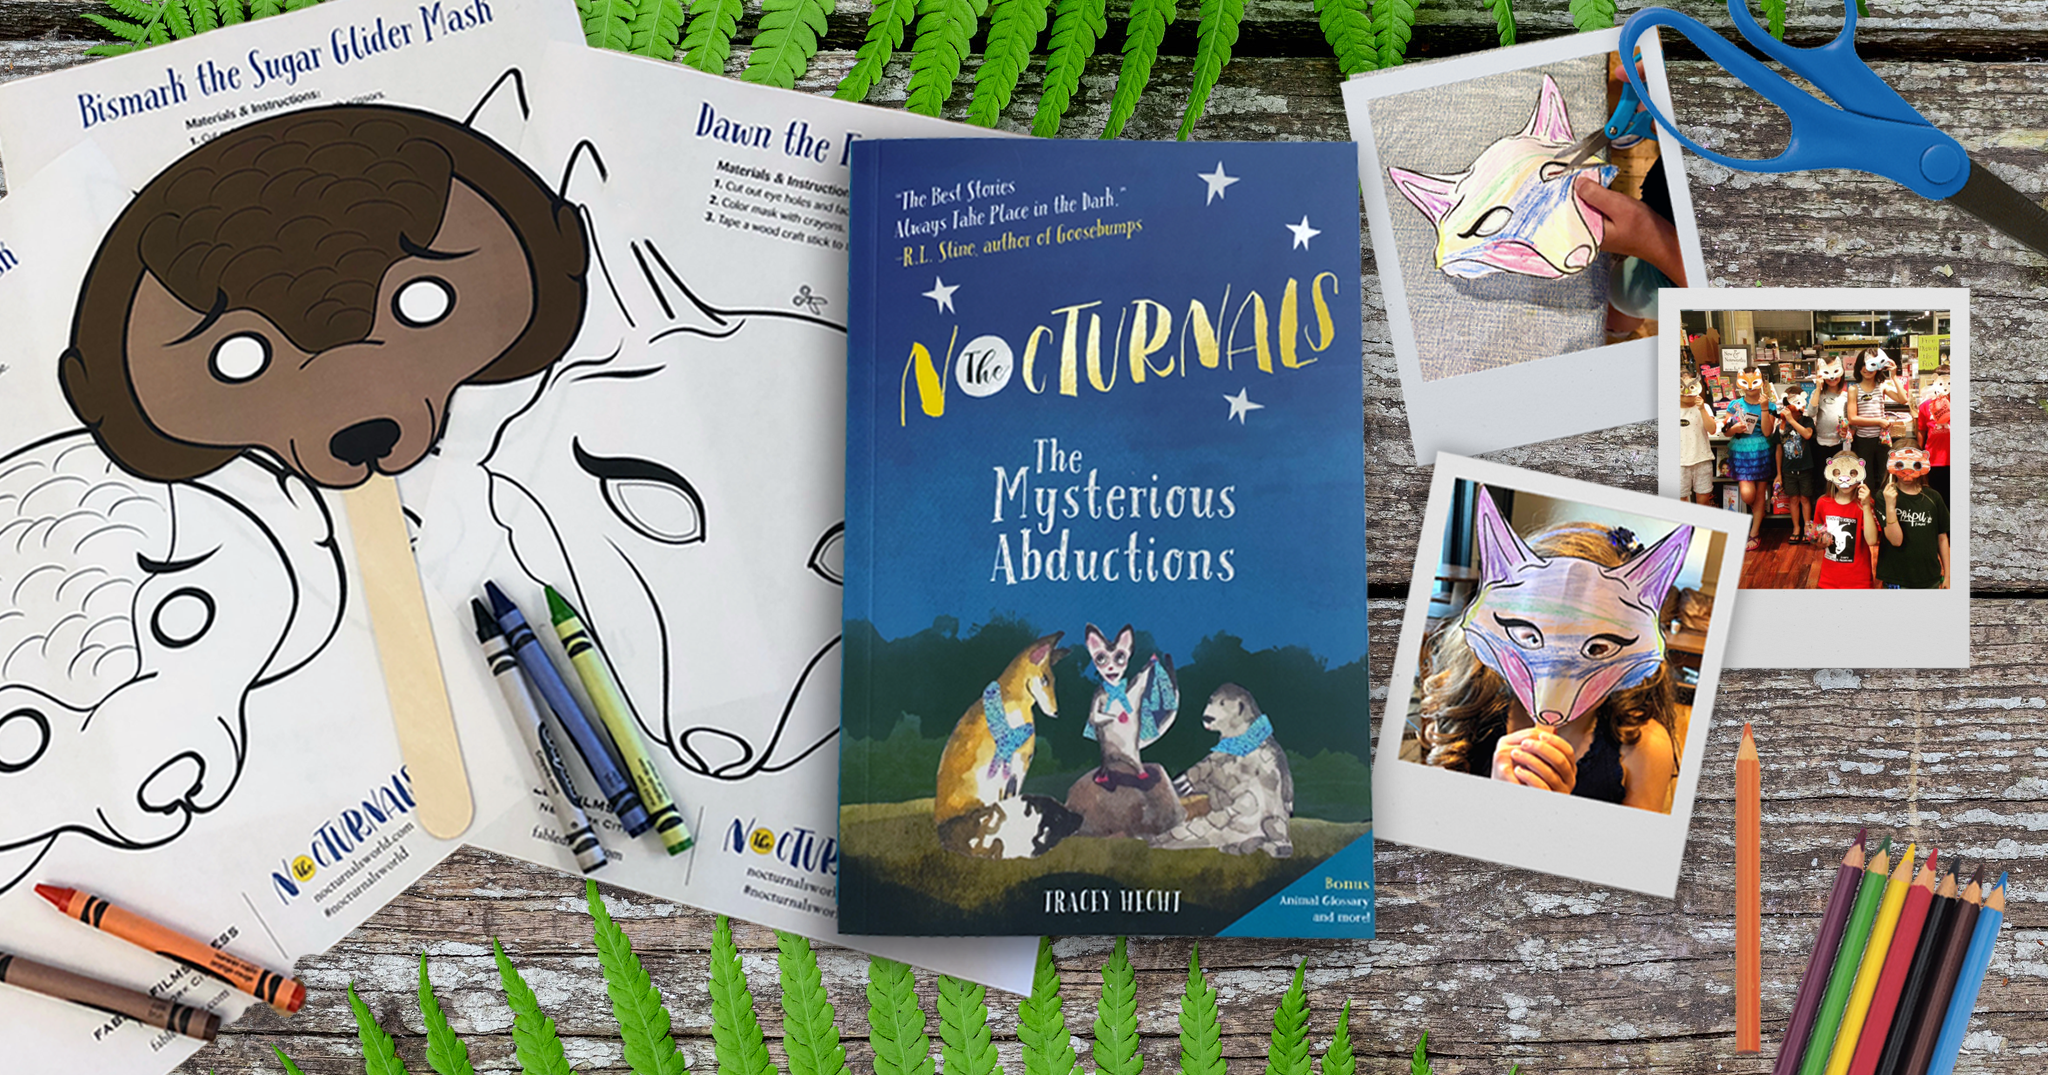 The Nocturnals Animal Mask Craft printable is laid out on a table to the left of The Mysterious Abductions. On the right are images of children cutting out and wearing their masks.